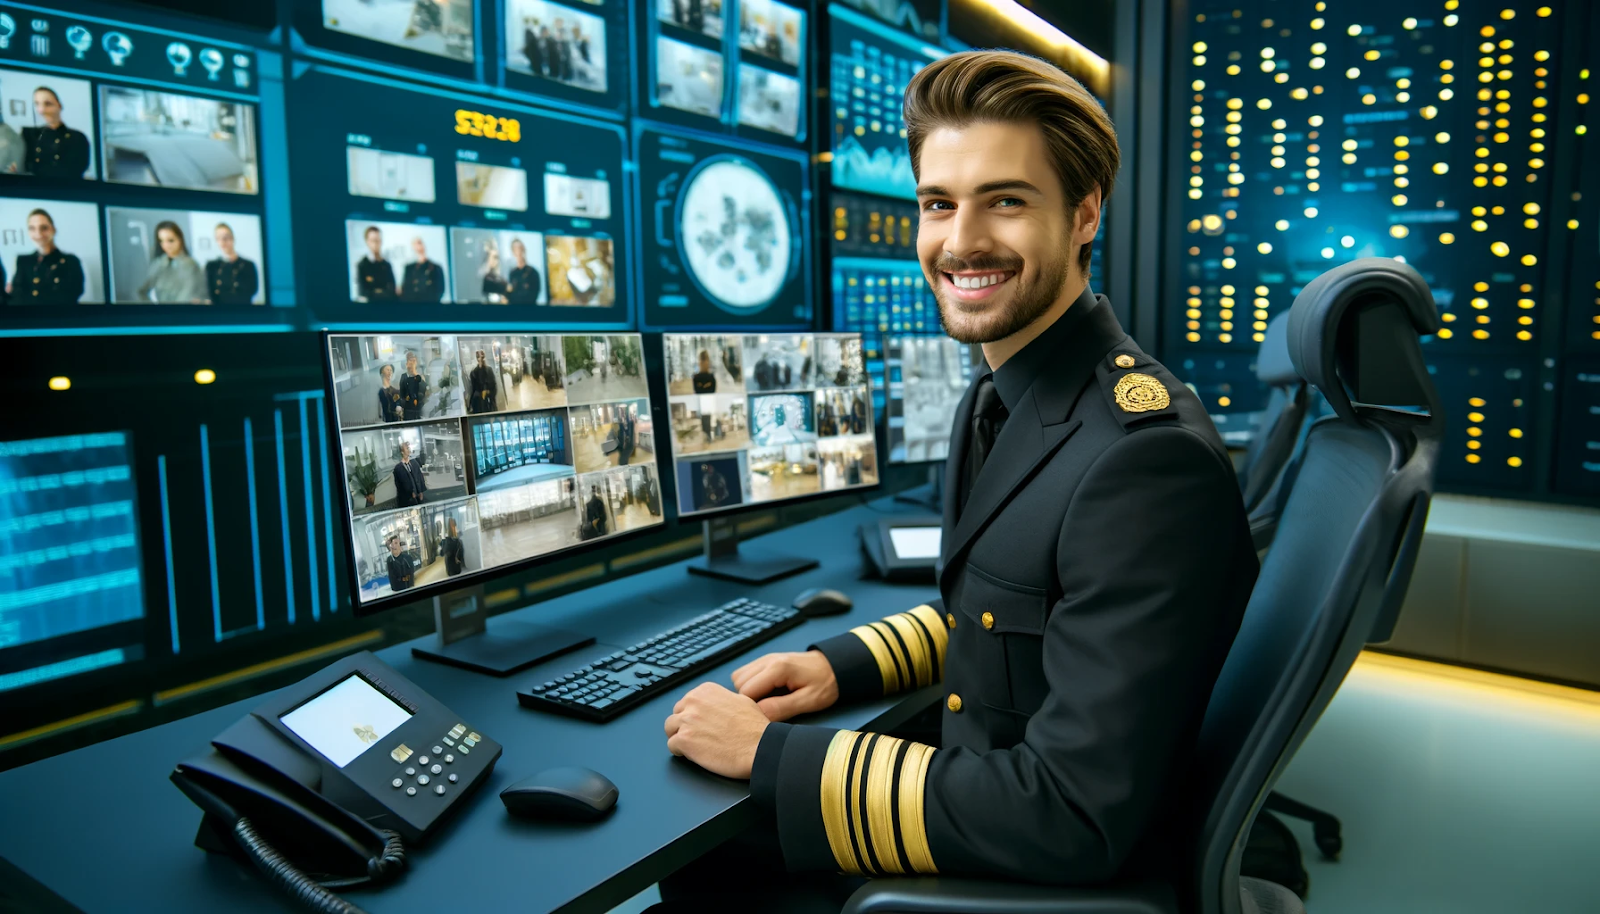 Cheerful security guard monitoring multiple surveillance screens, showcasing data-driven security operations in a modern control room